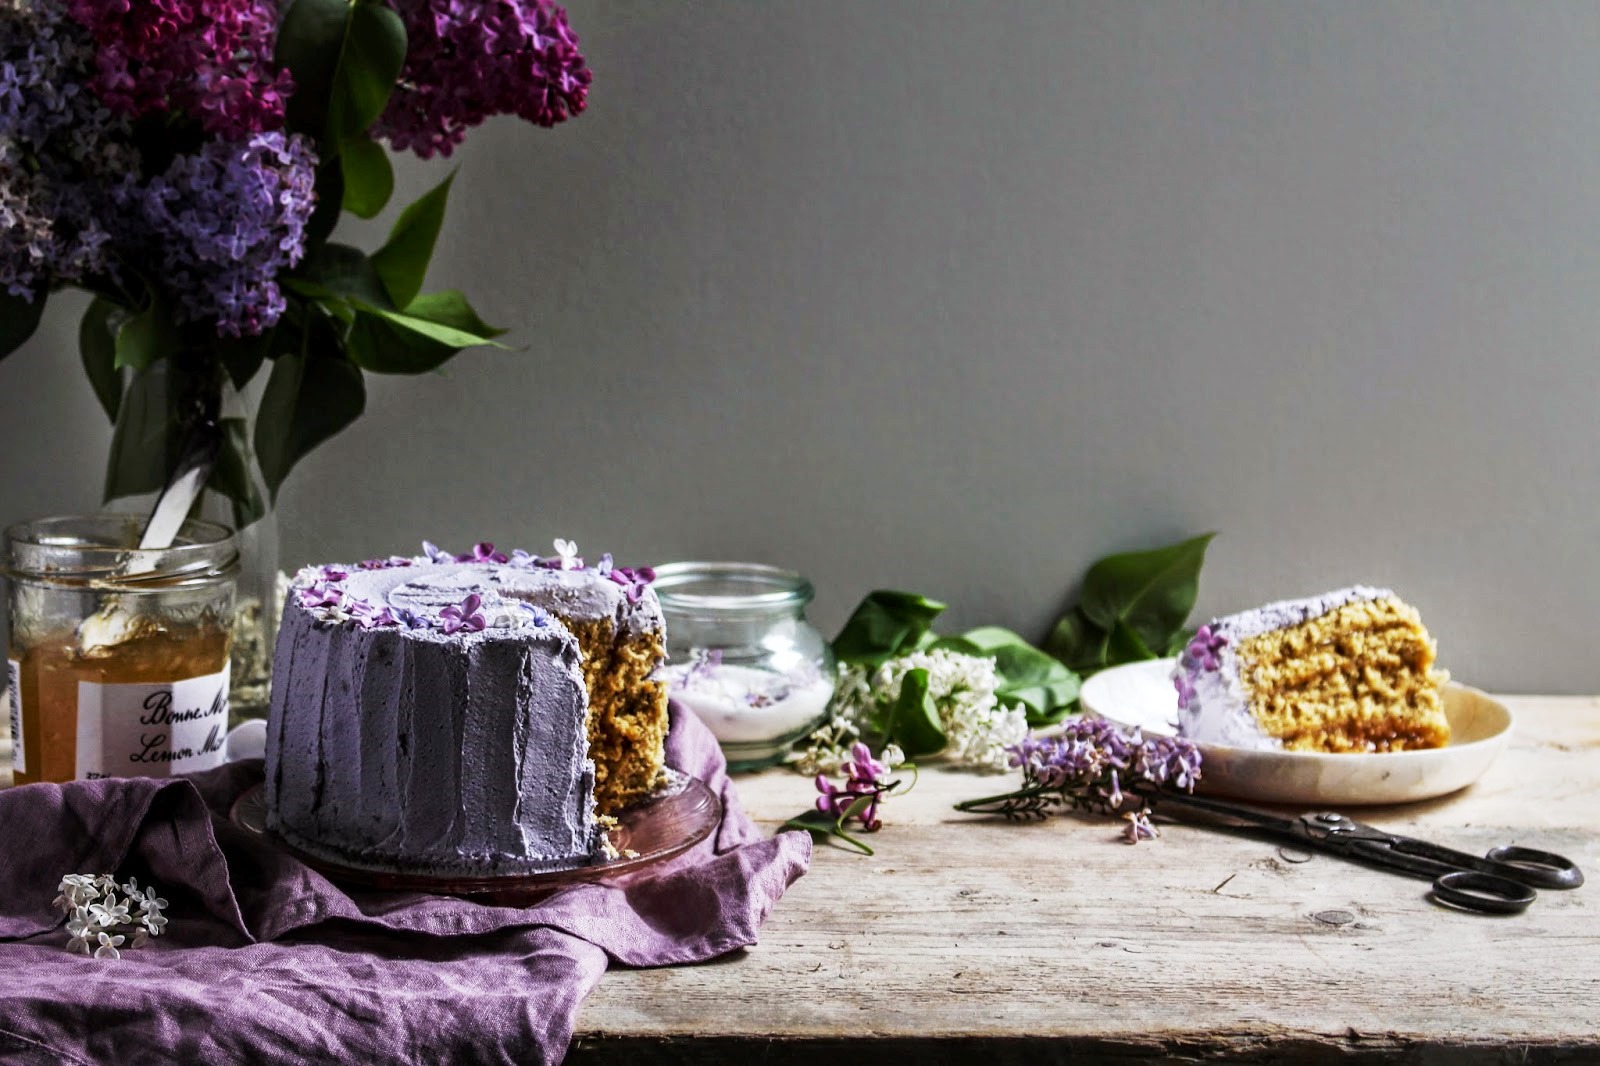 Earl Grey and Lemon Vertical Roll Cake with Lilacs (Photo: Twigg Studios)